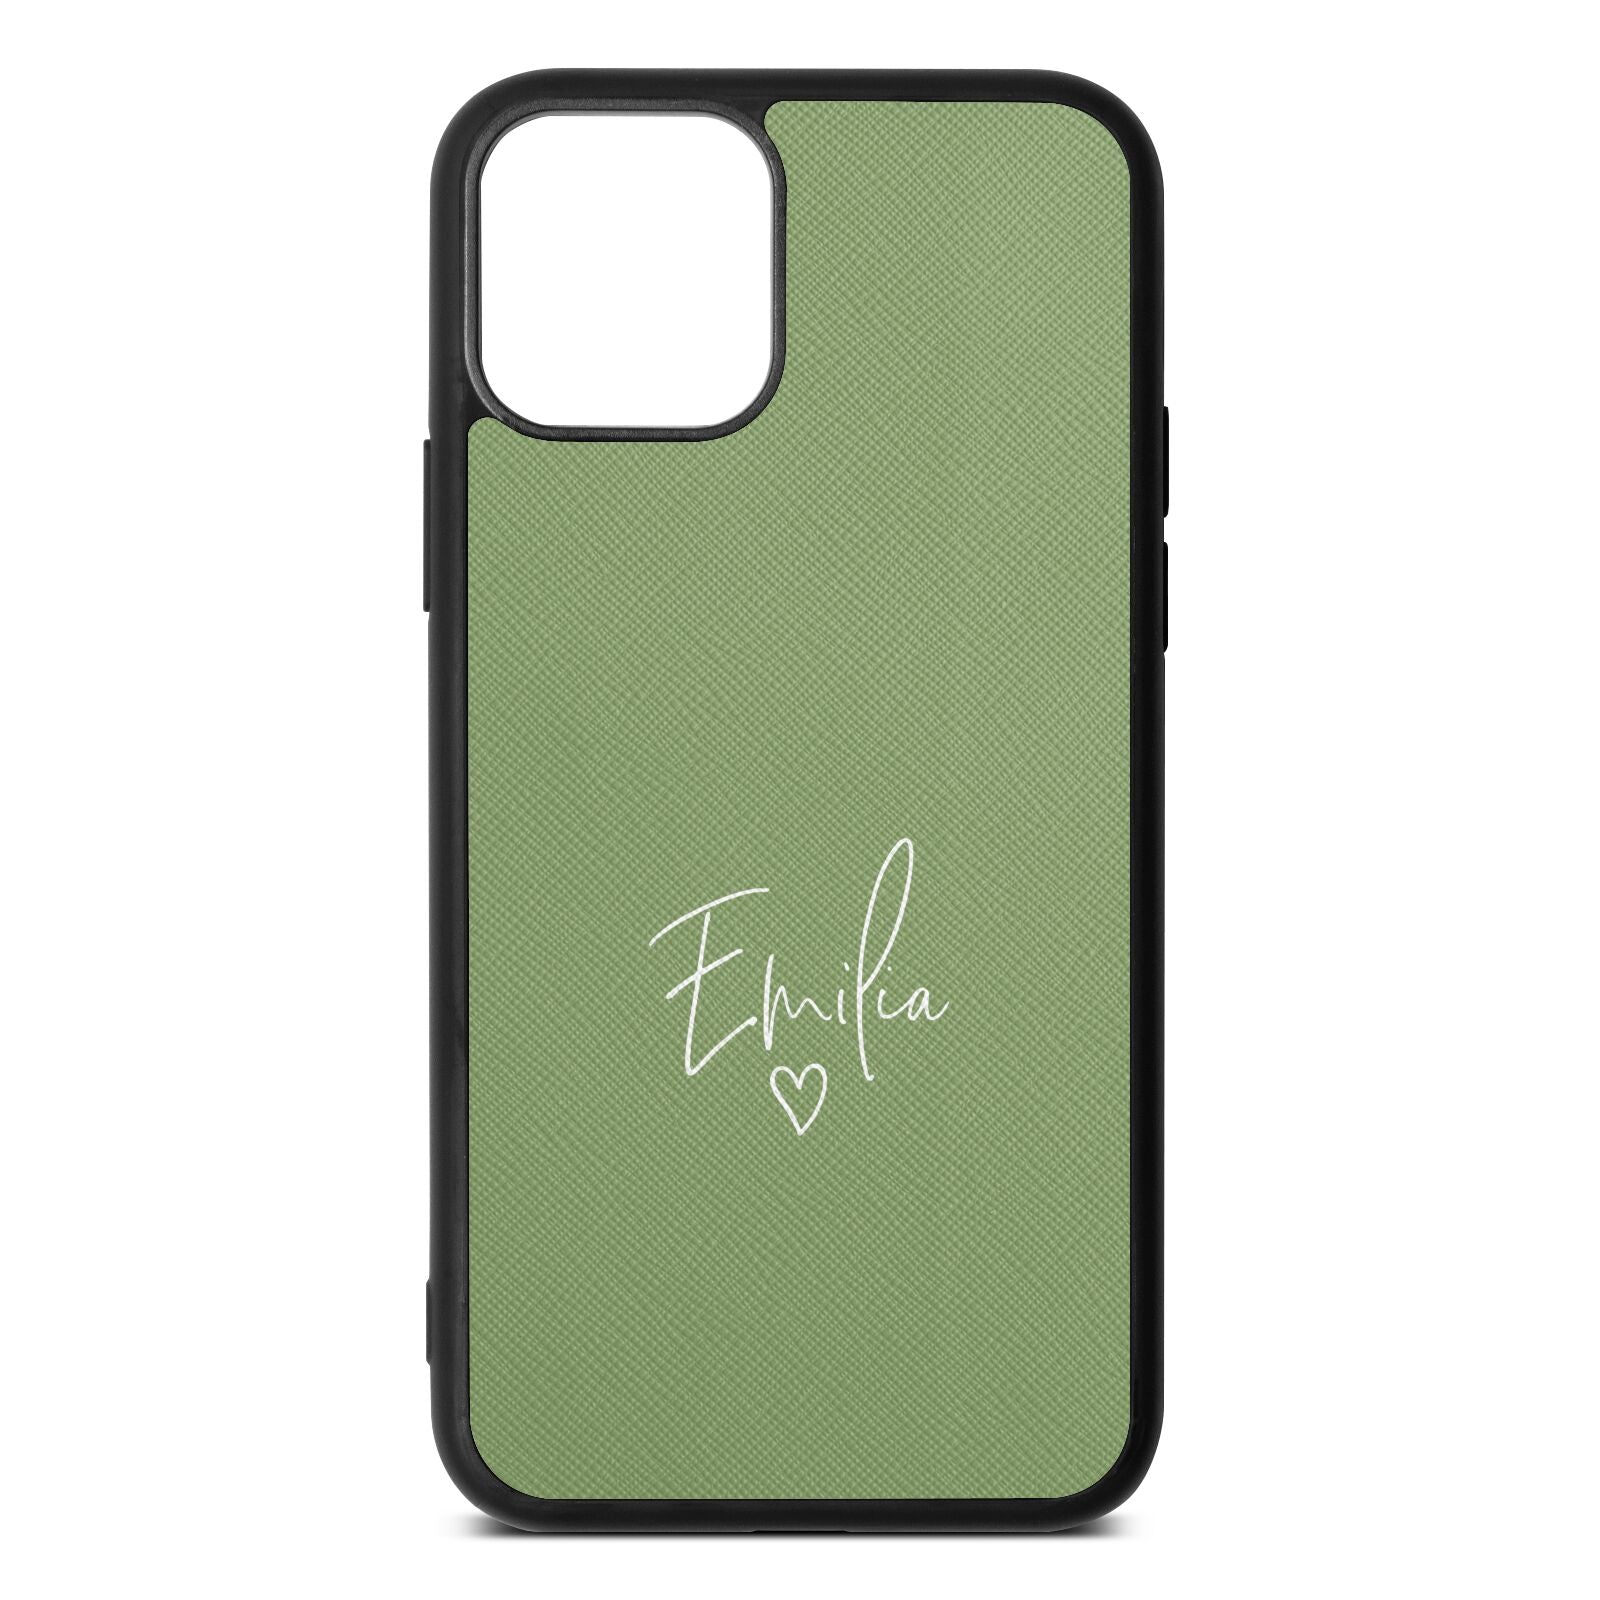 White Handwritten Name Transparent Lime Saffiano Leather iPhone 11 Case